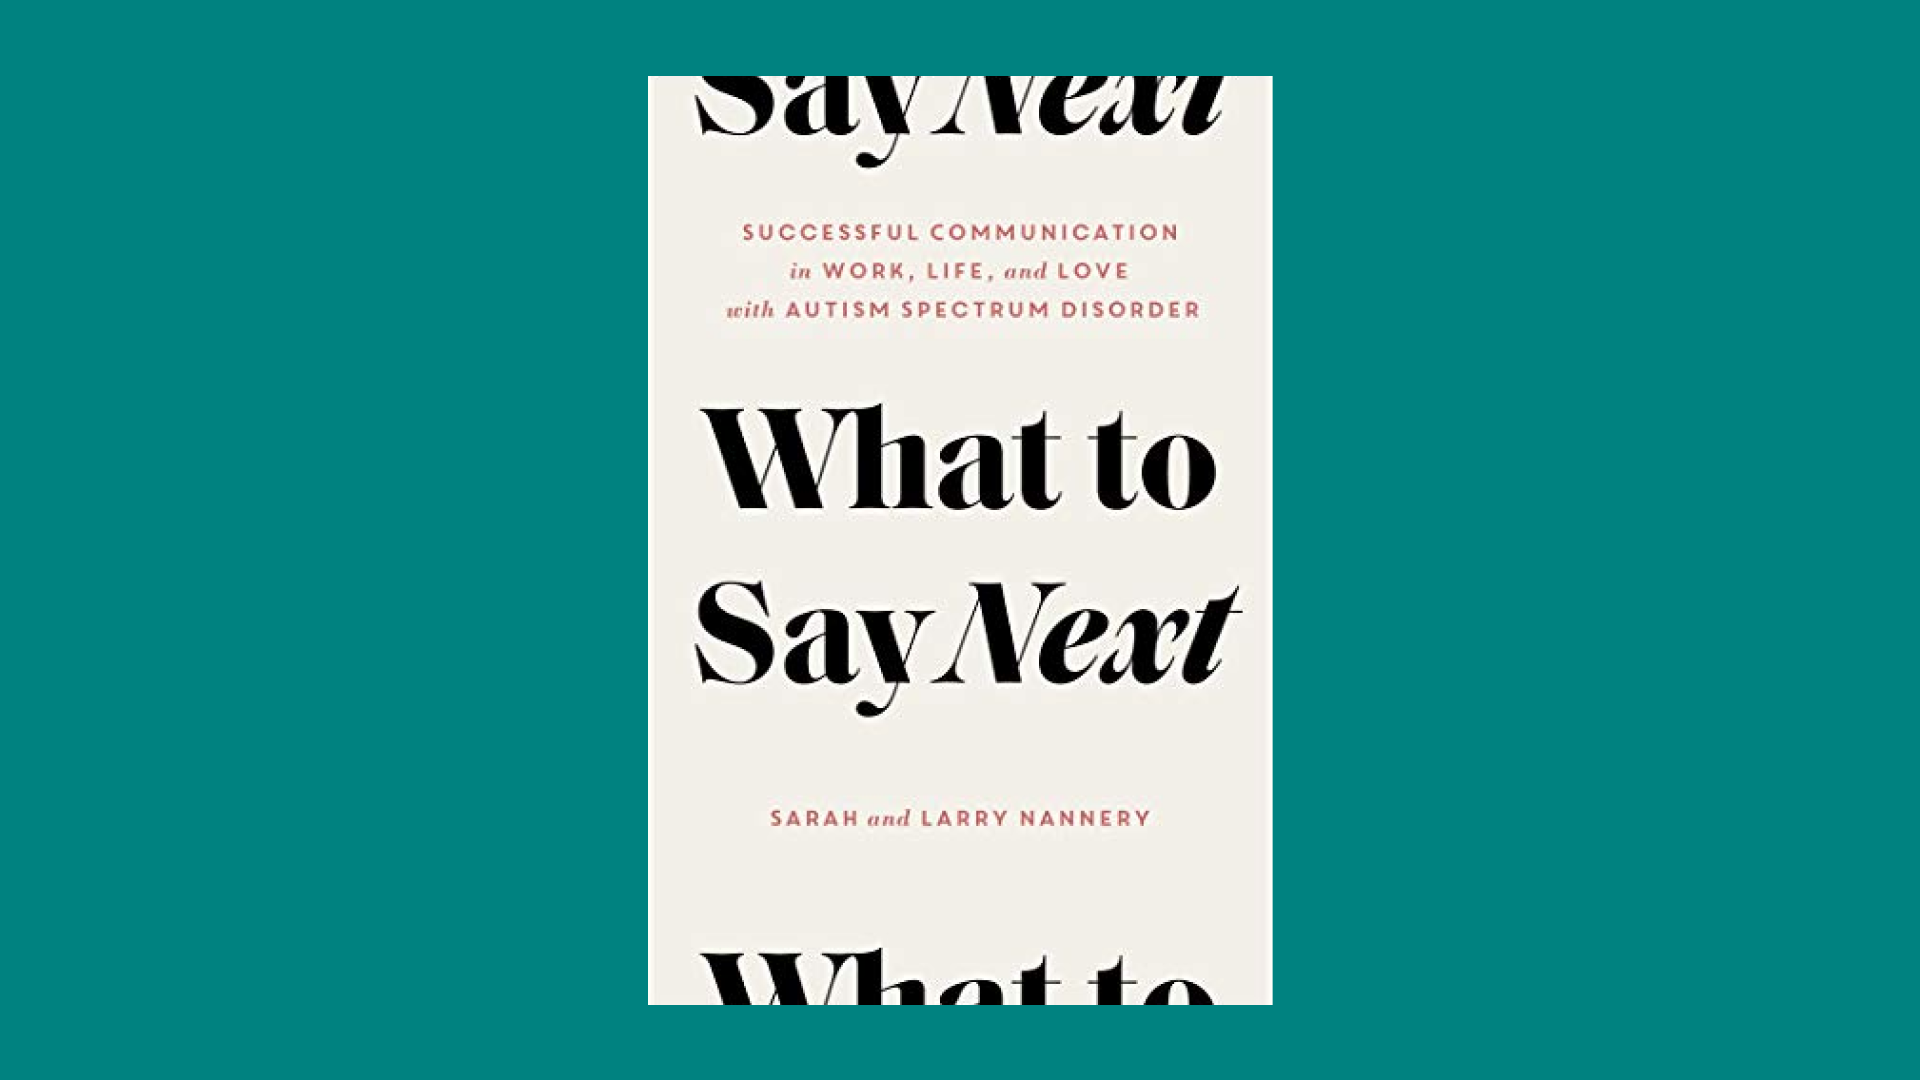 Cover of book "What to Say Next"